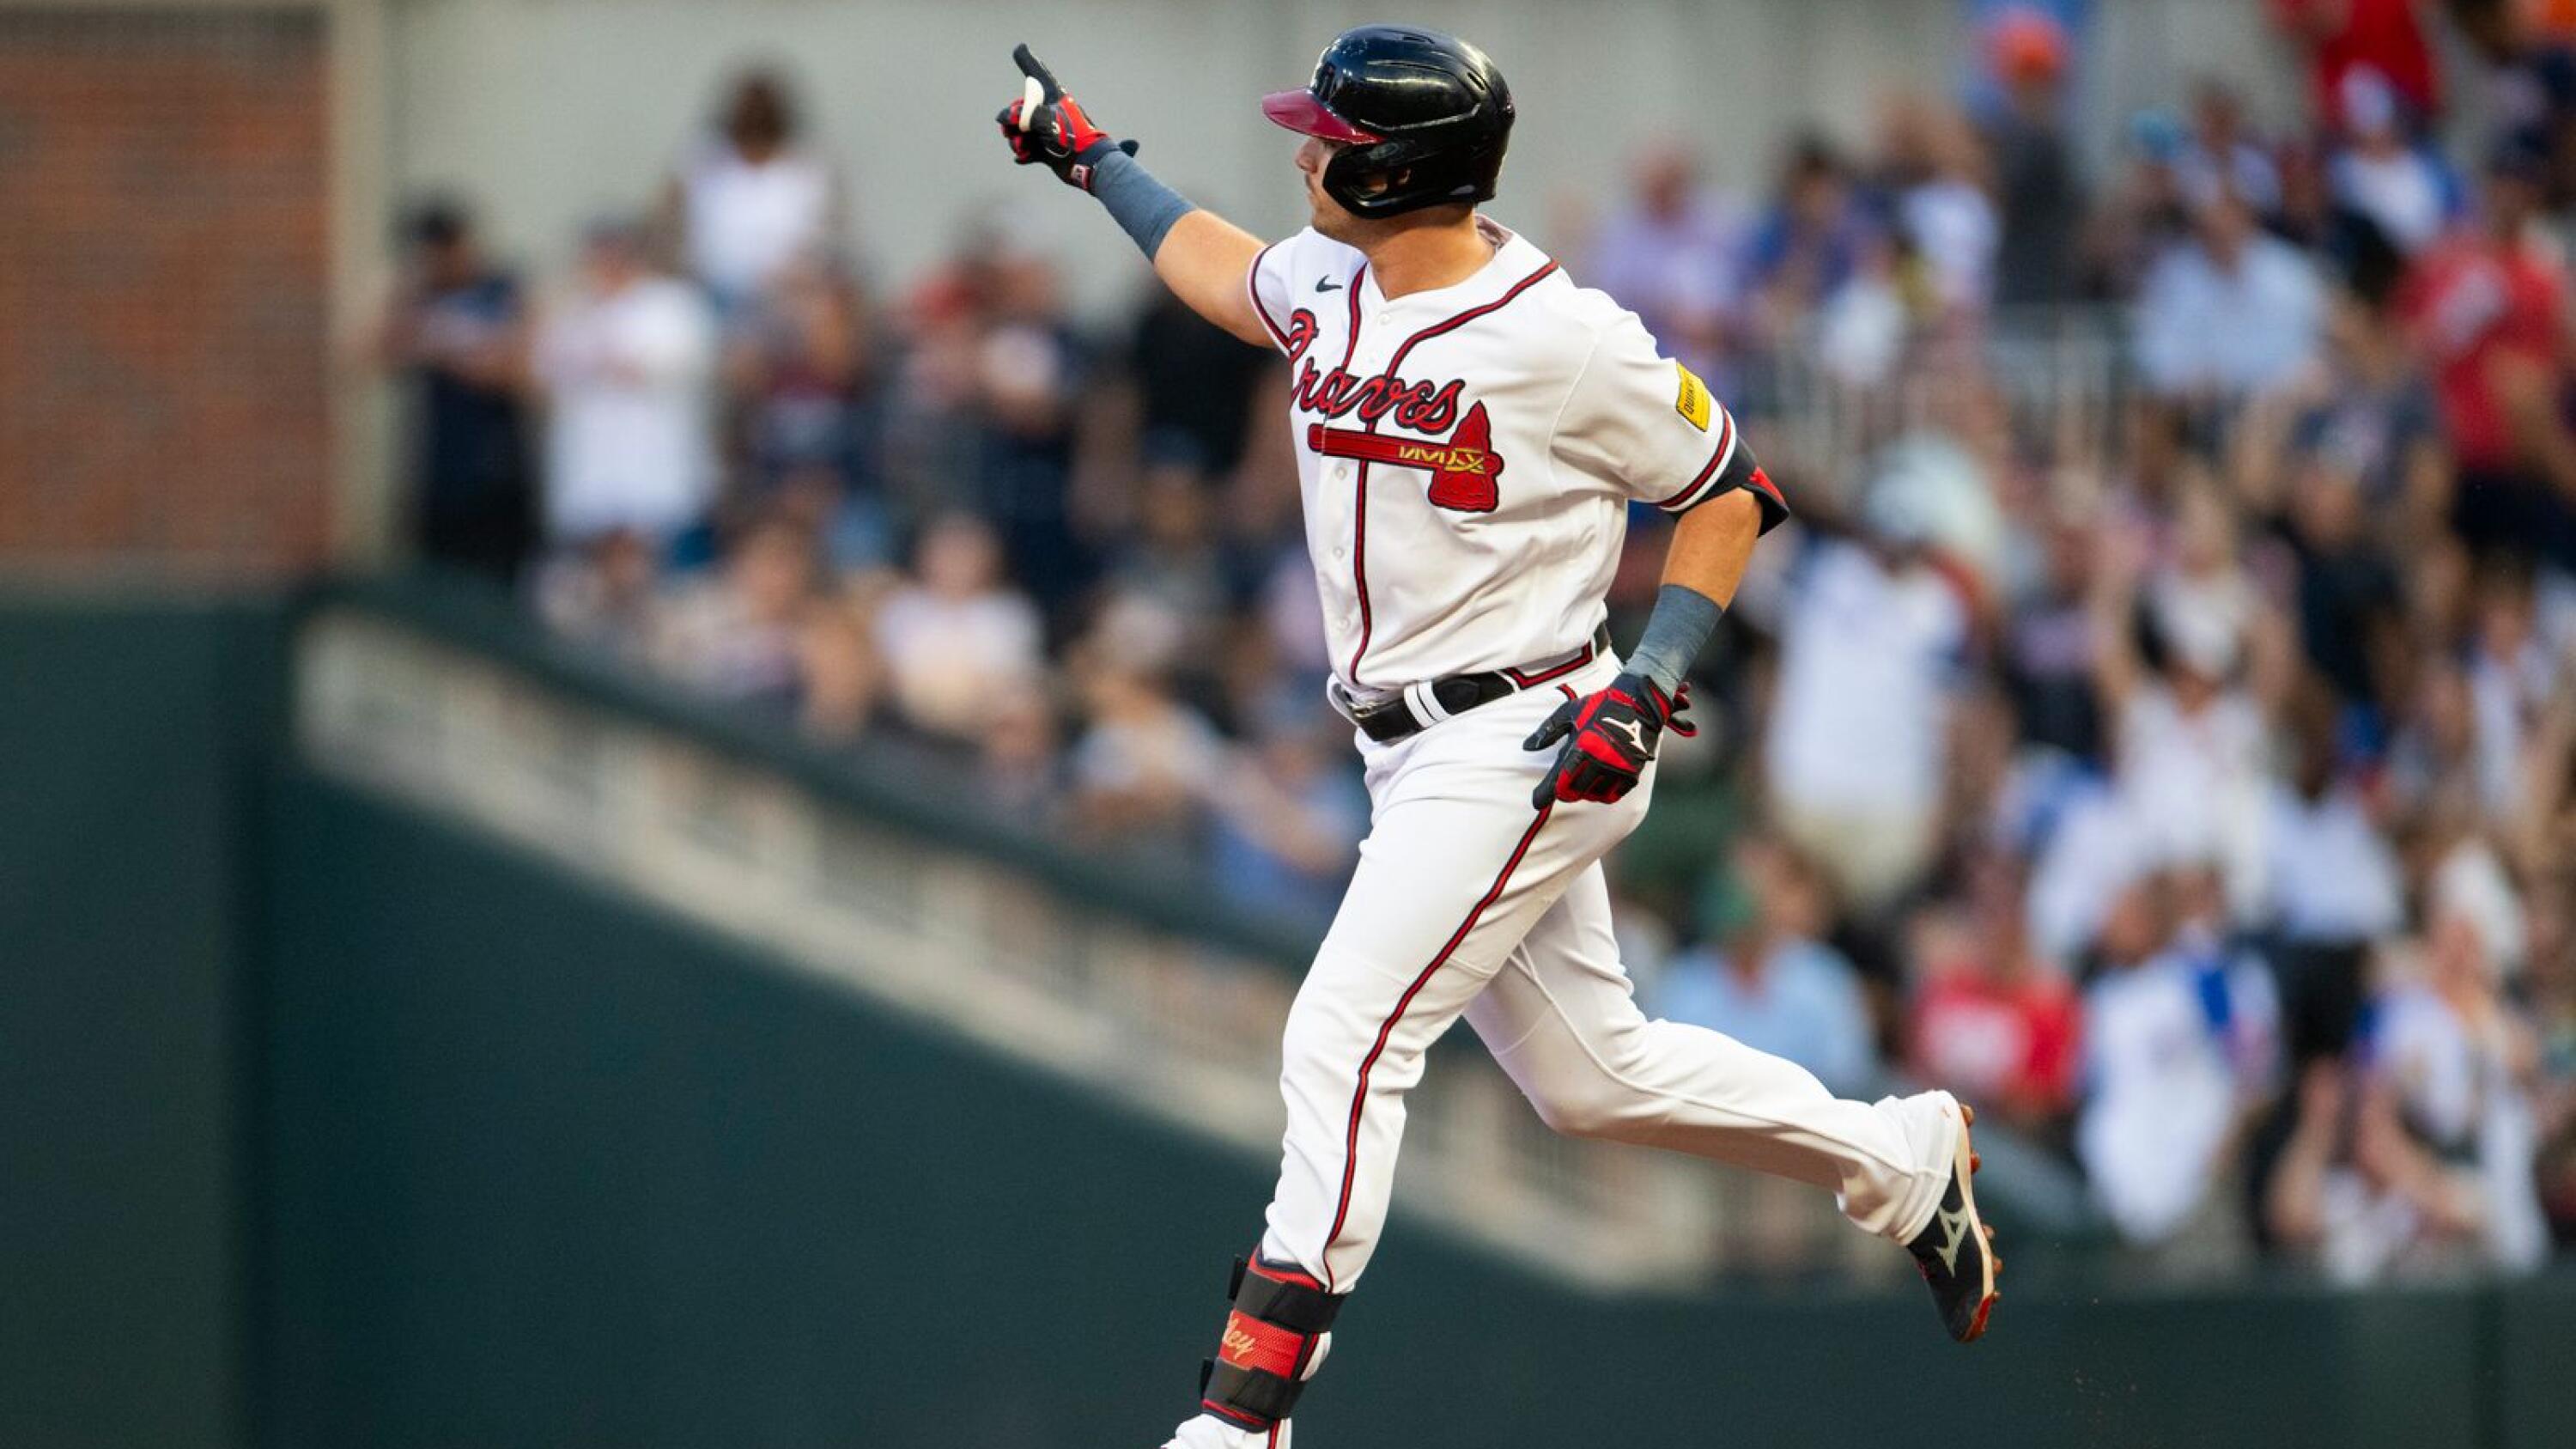 Another postseason dud for Fried when Braves need him most